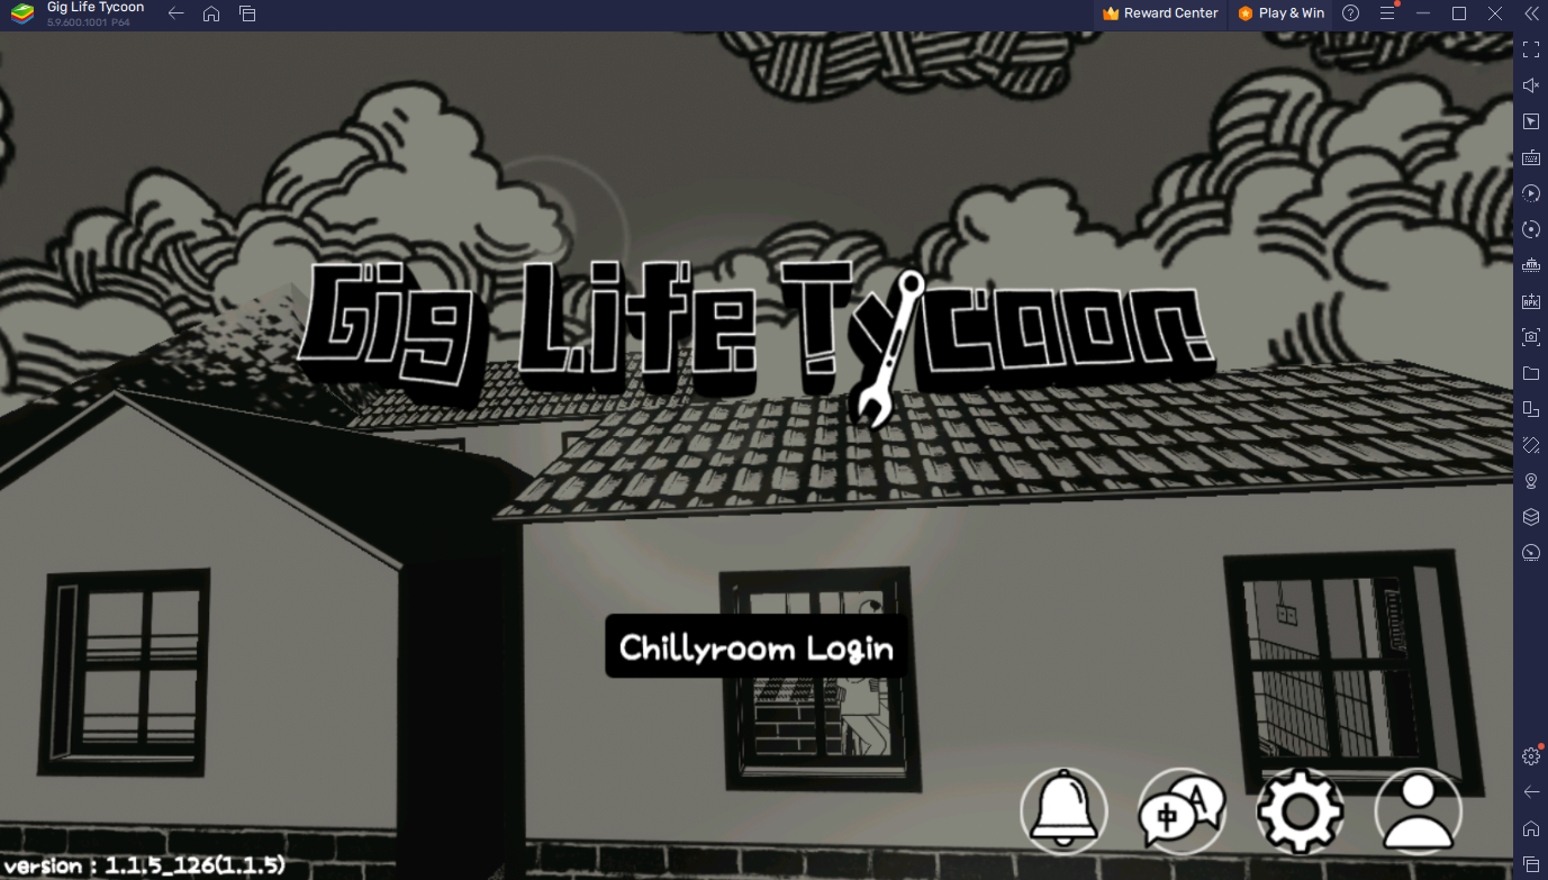 How to Play Gig Life Tycoon on PC with BlueStacks